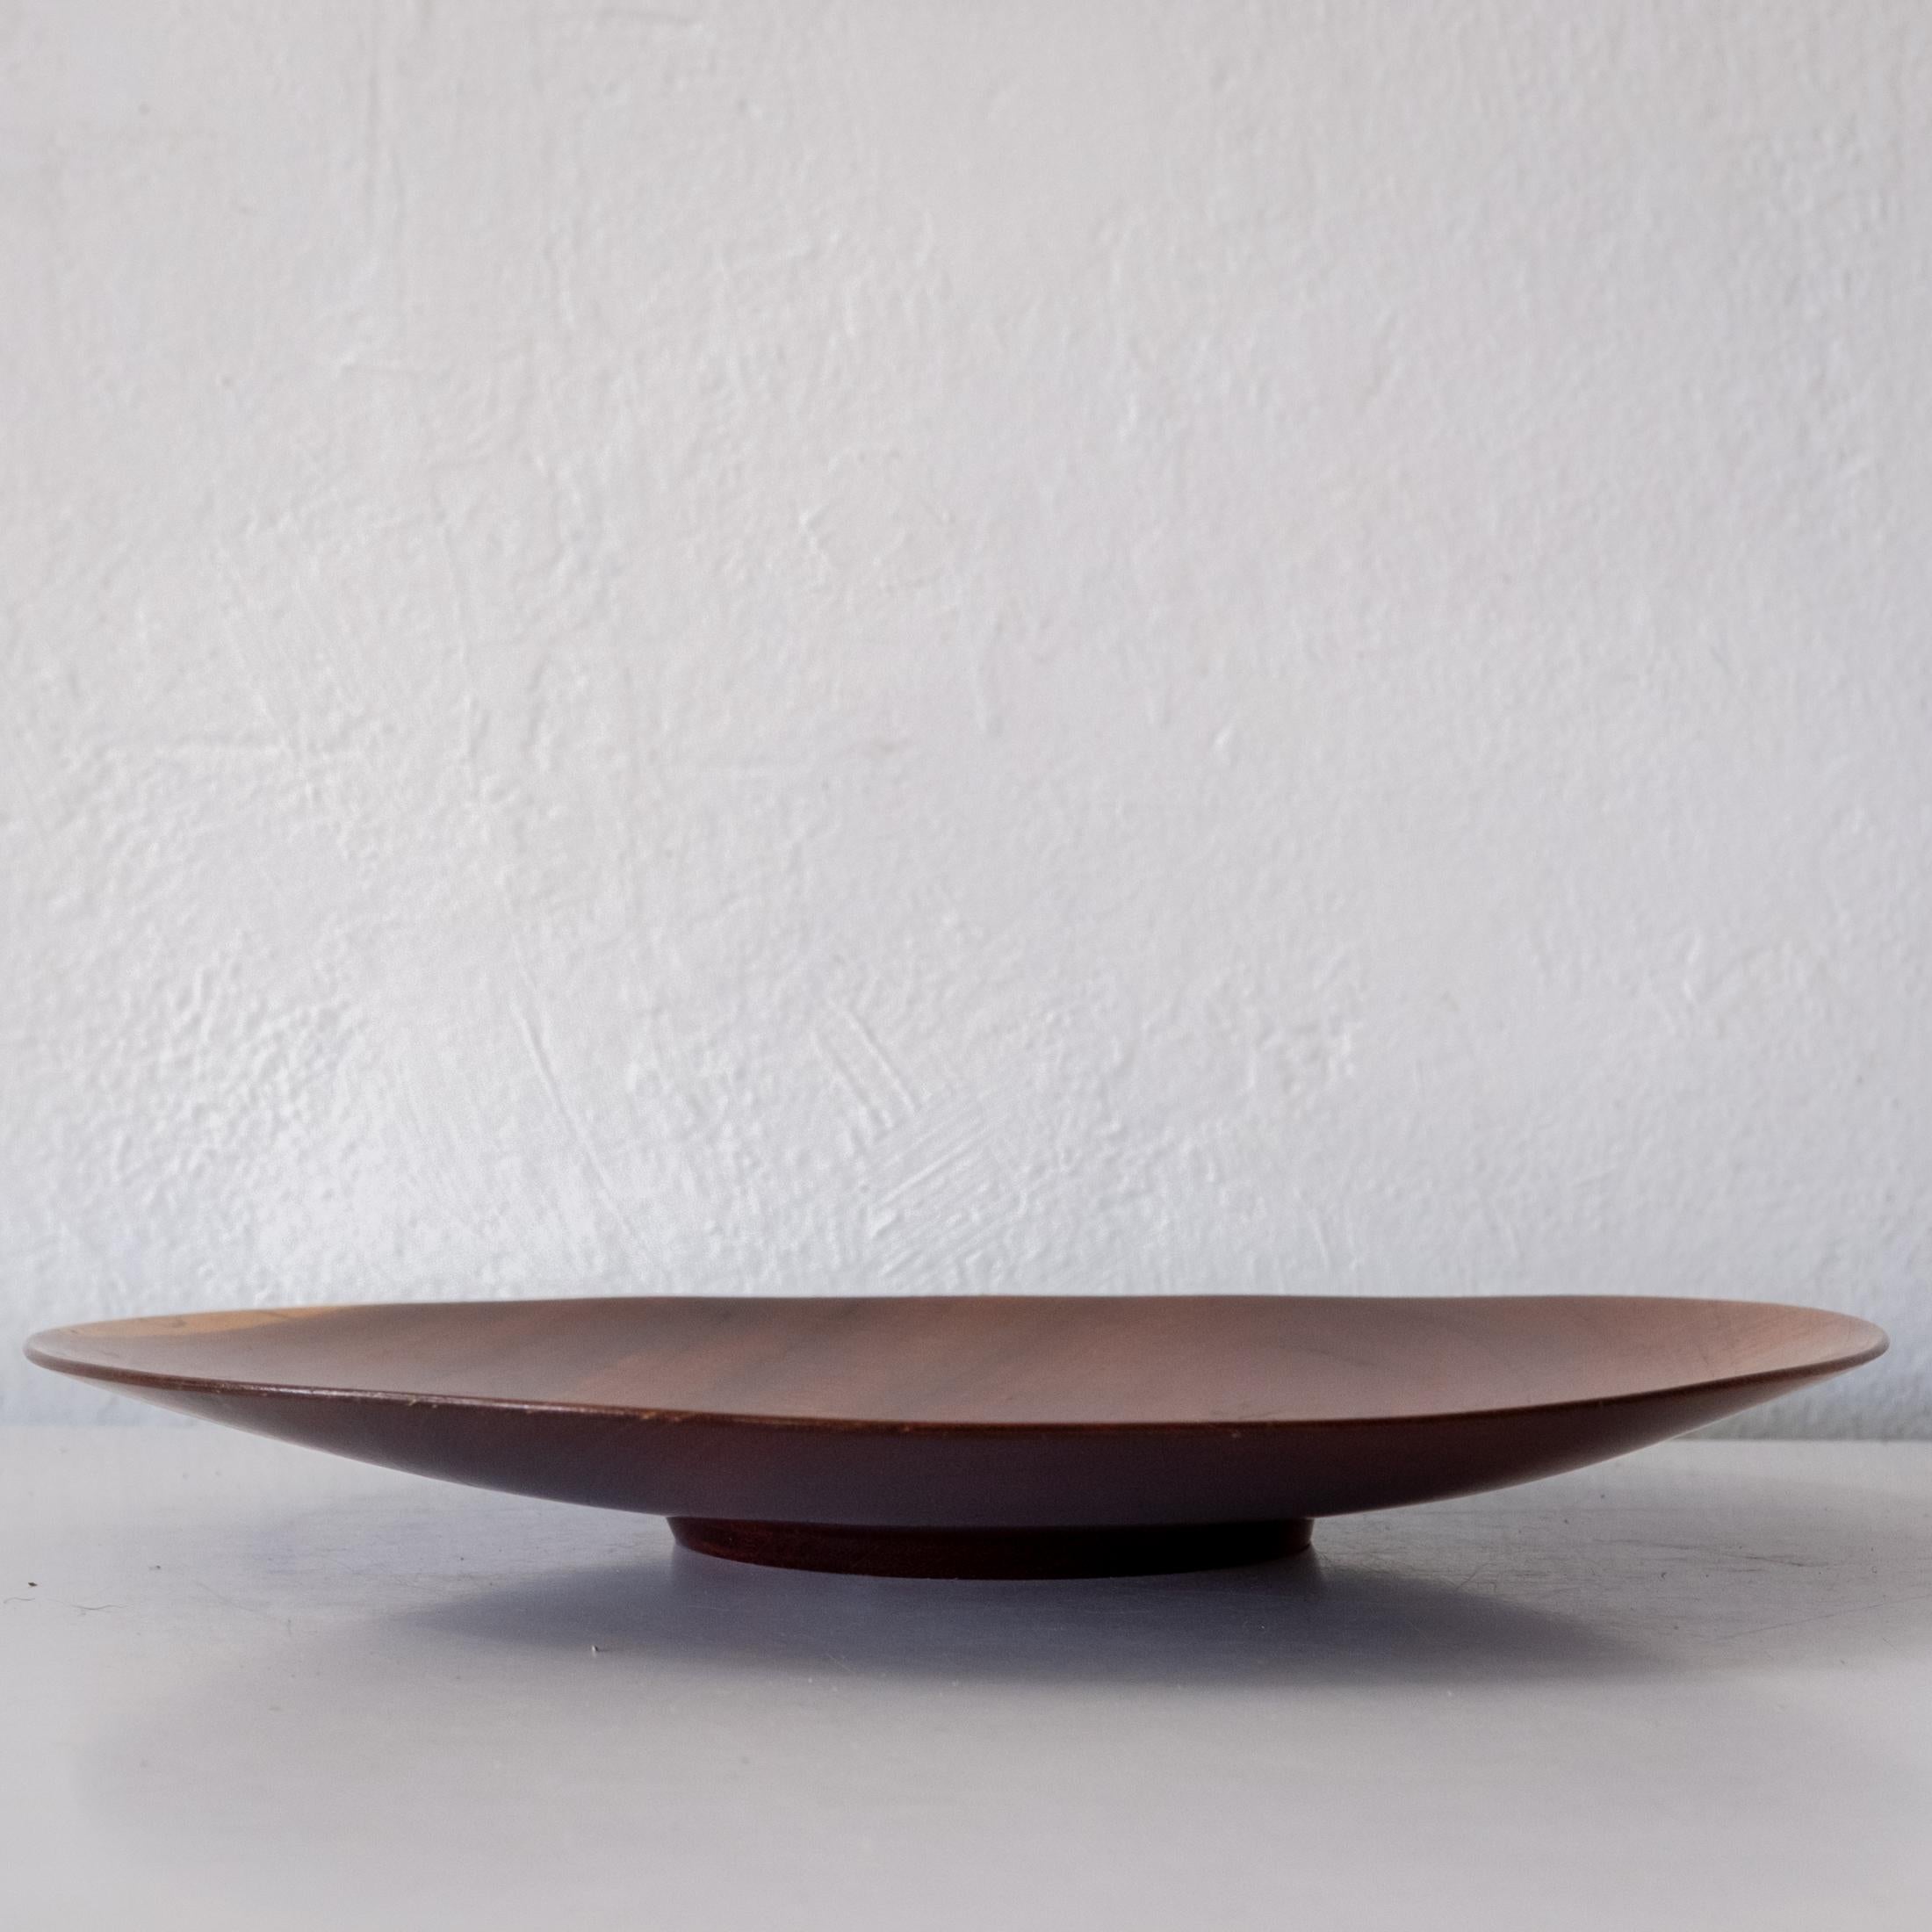 Studio Turned Low Bowl or Plate by Bob Stocksdale In Good Condition For Sale In San Diego, CA